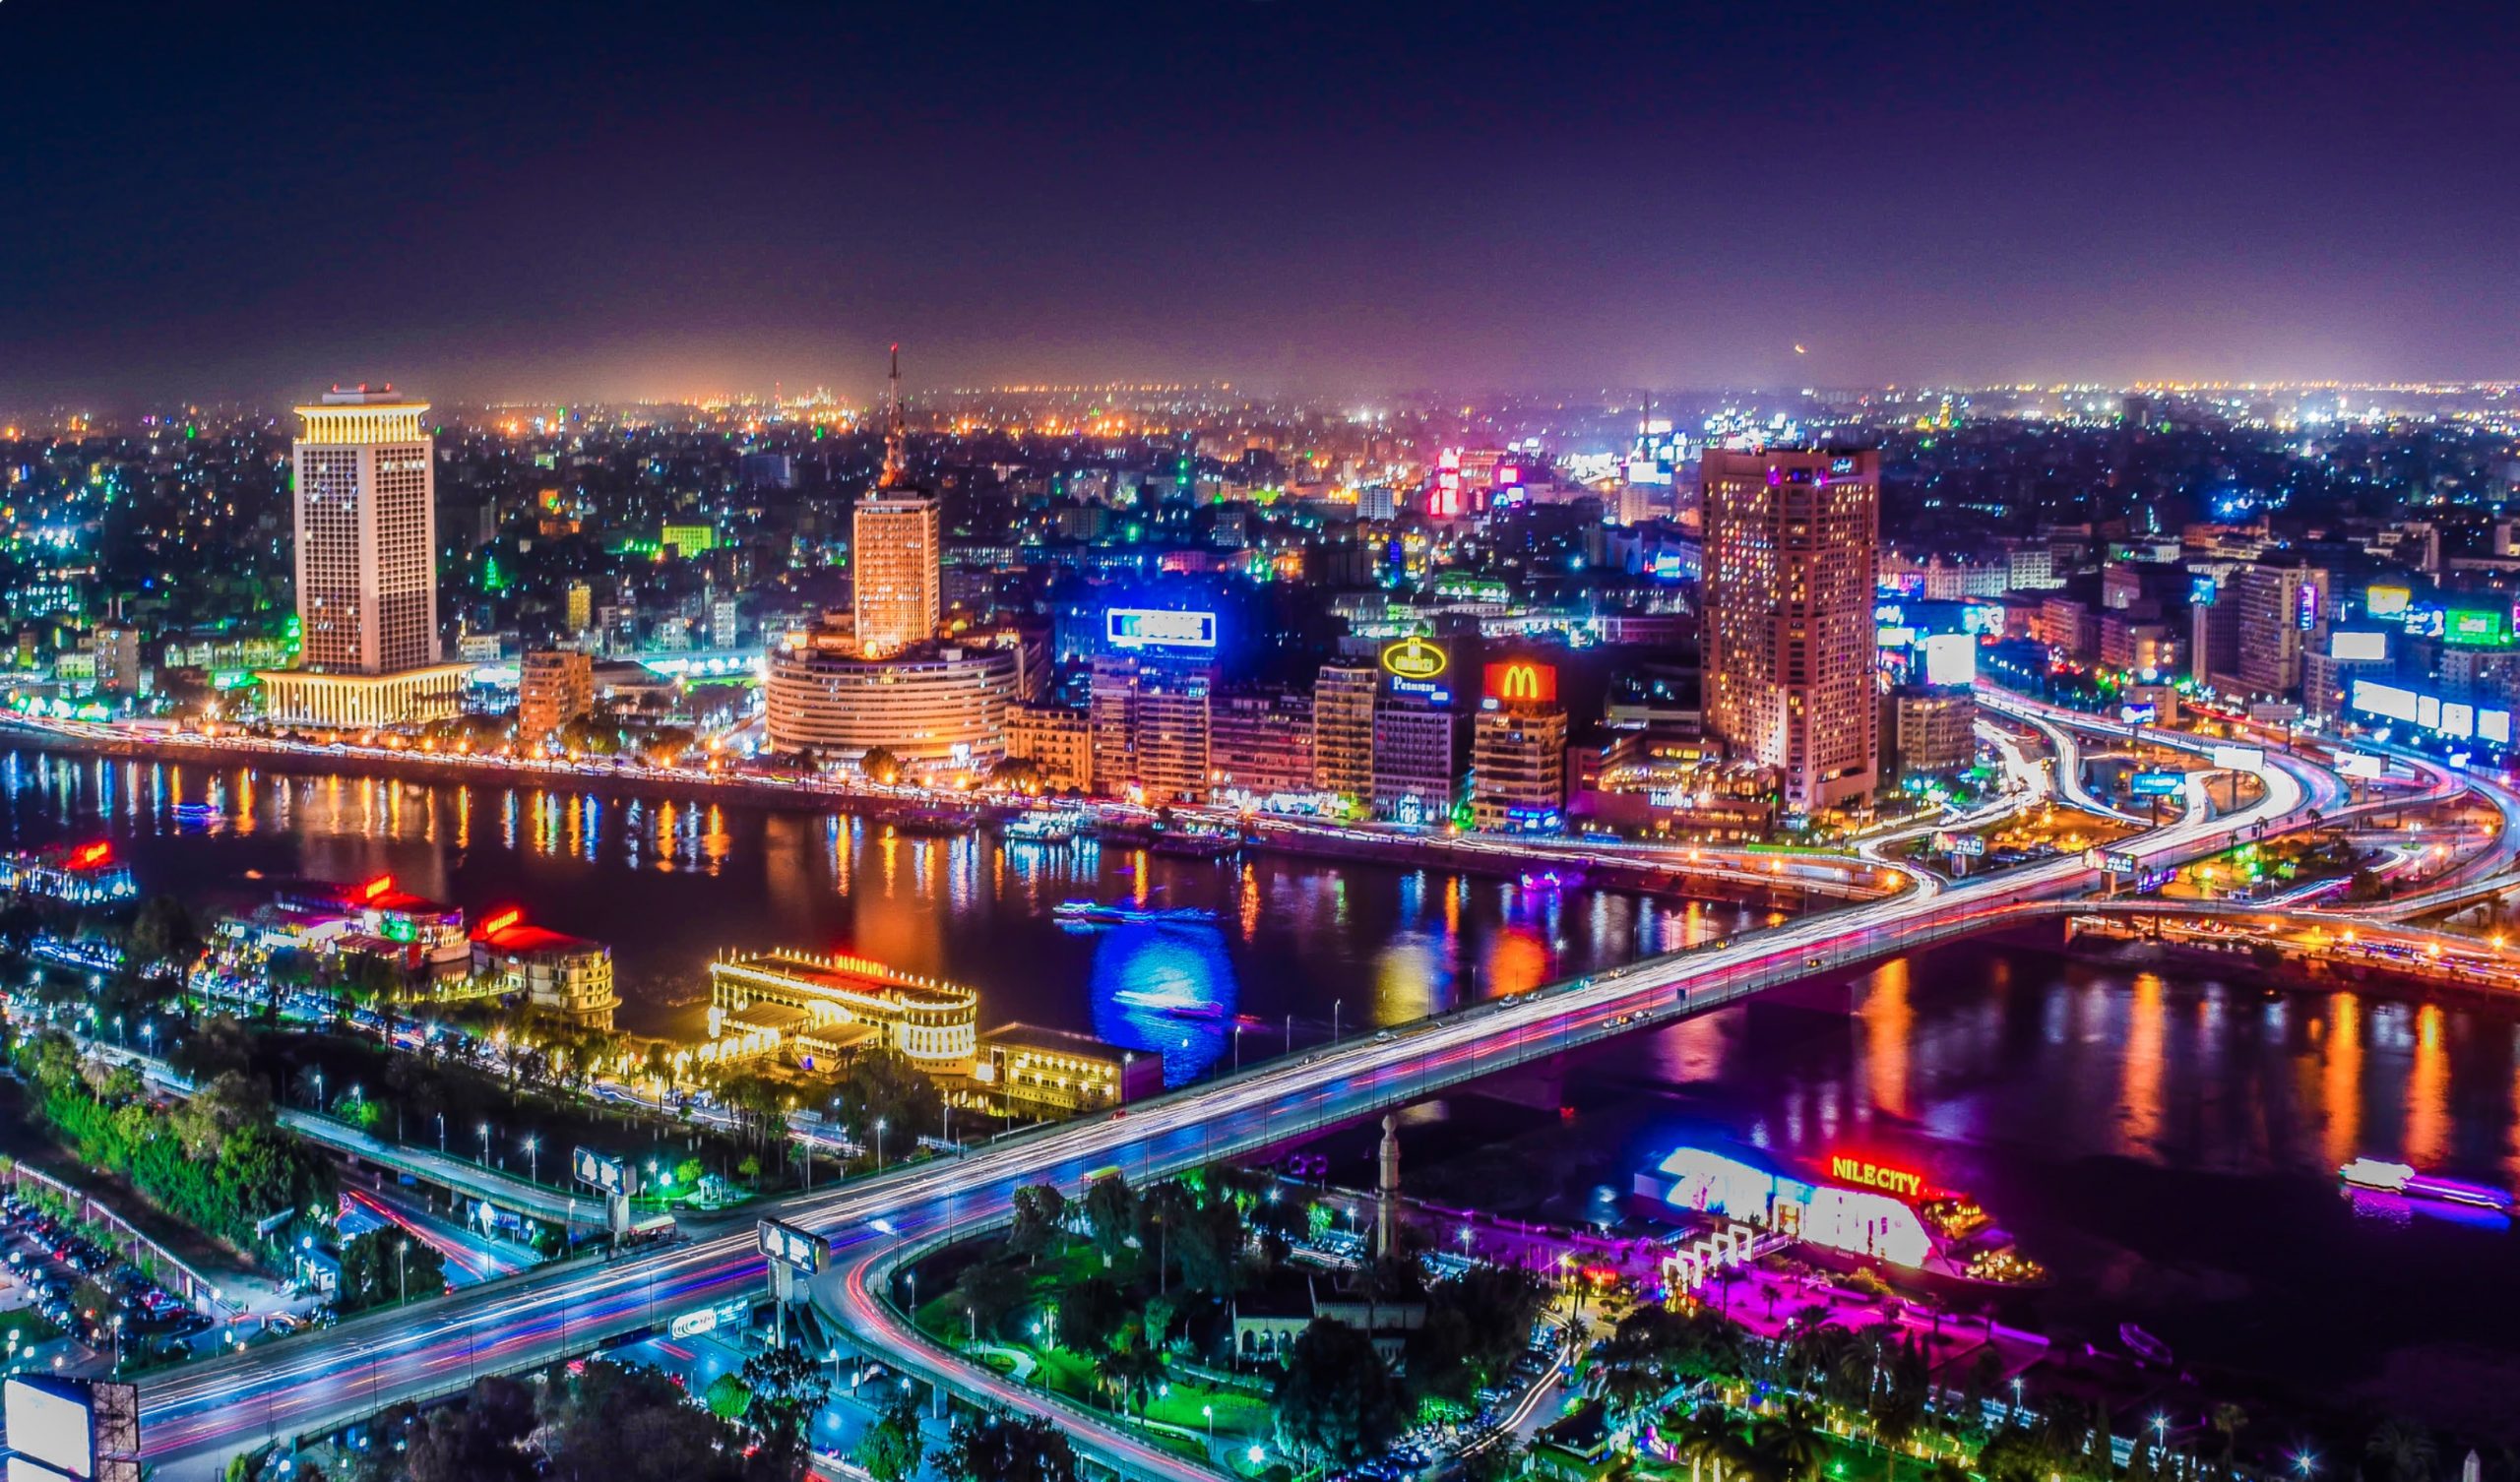 Cairo night-time cityscape with view across the Nile